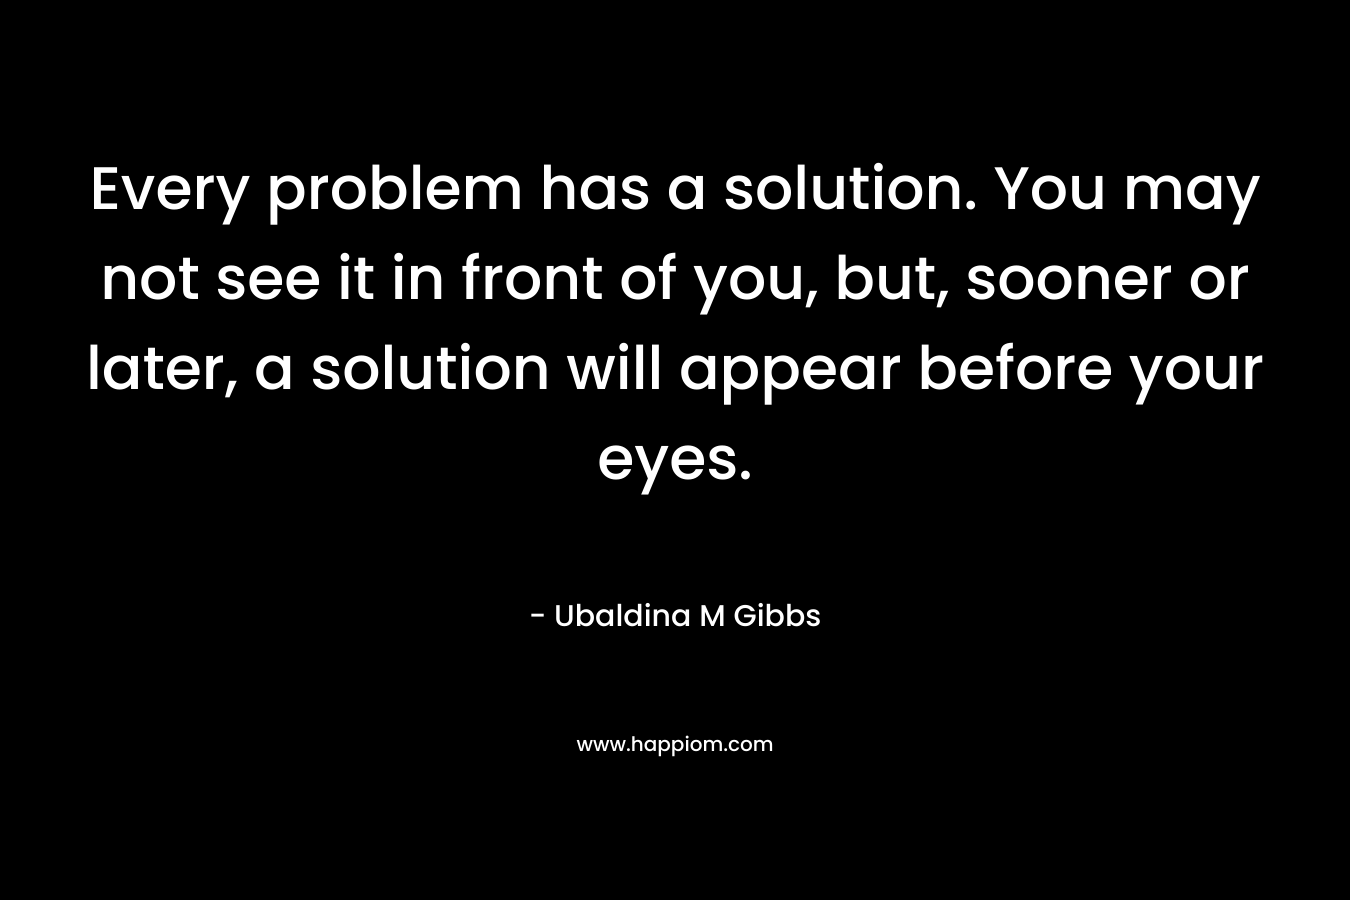 Every problem has a solution. You may not see it in front of you, but, sooner or later, a solution will appear before your eyes. – Ubaldina M Gibbs